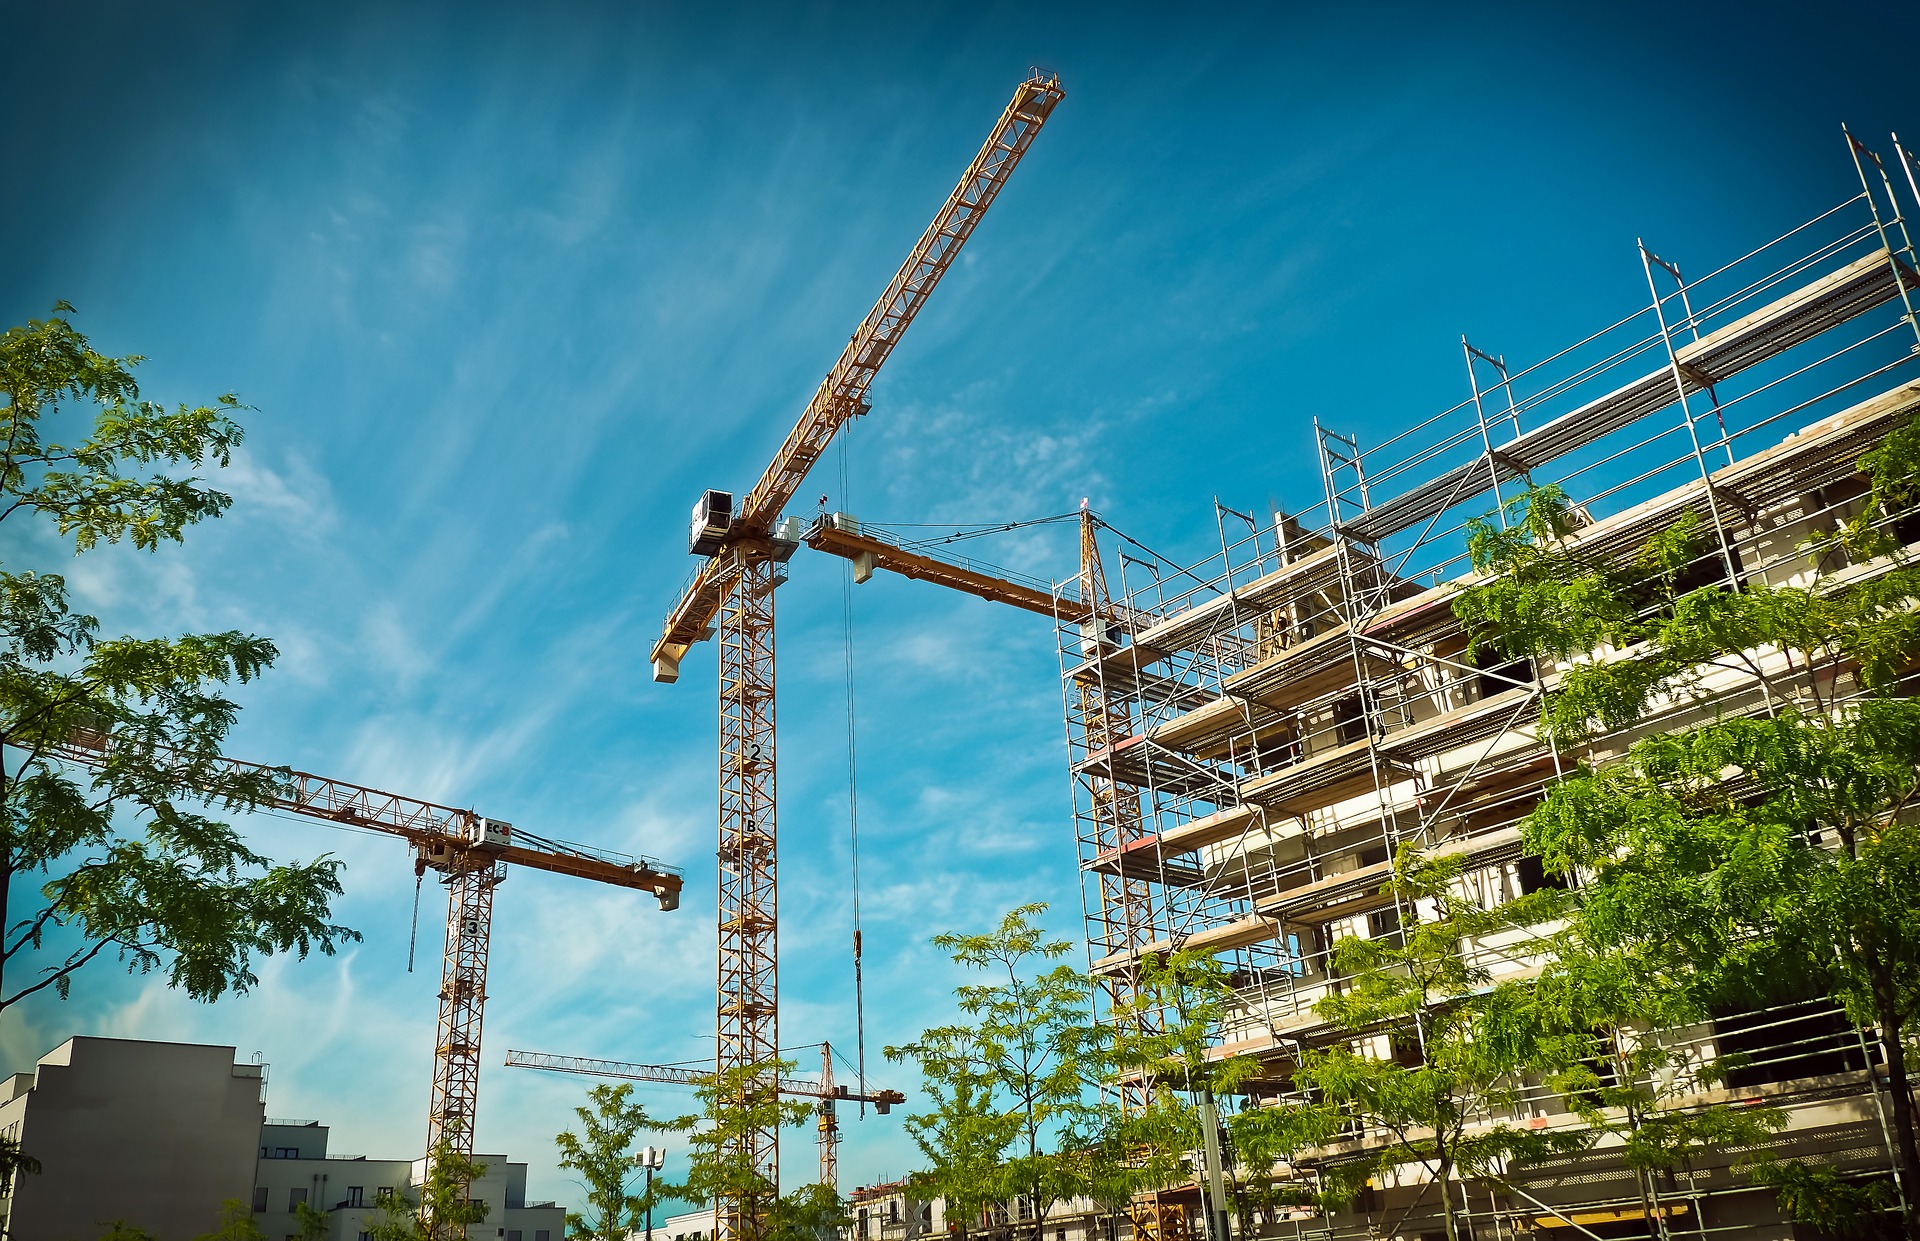 Top five multi-family housing construction projects that commenced in Canada in Q3 2021